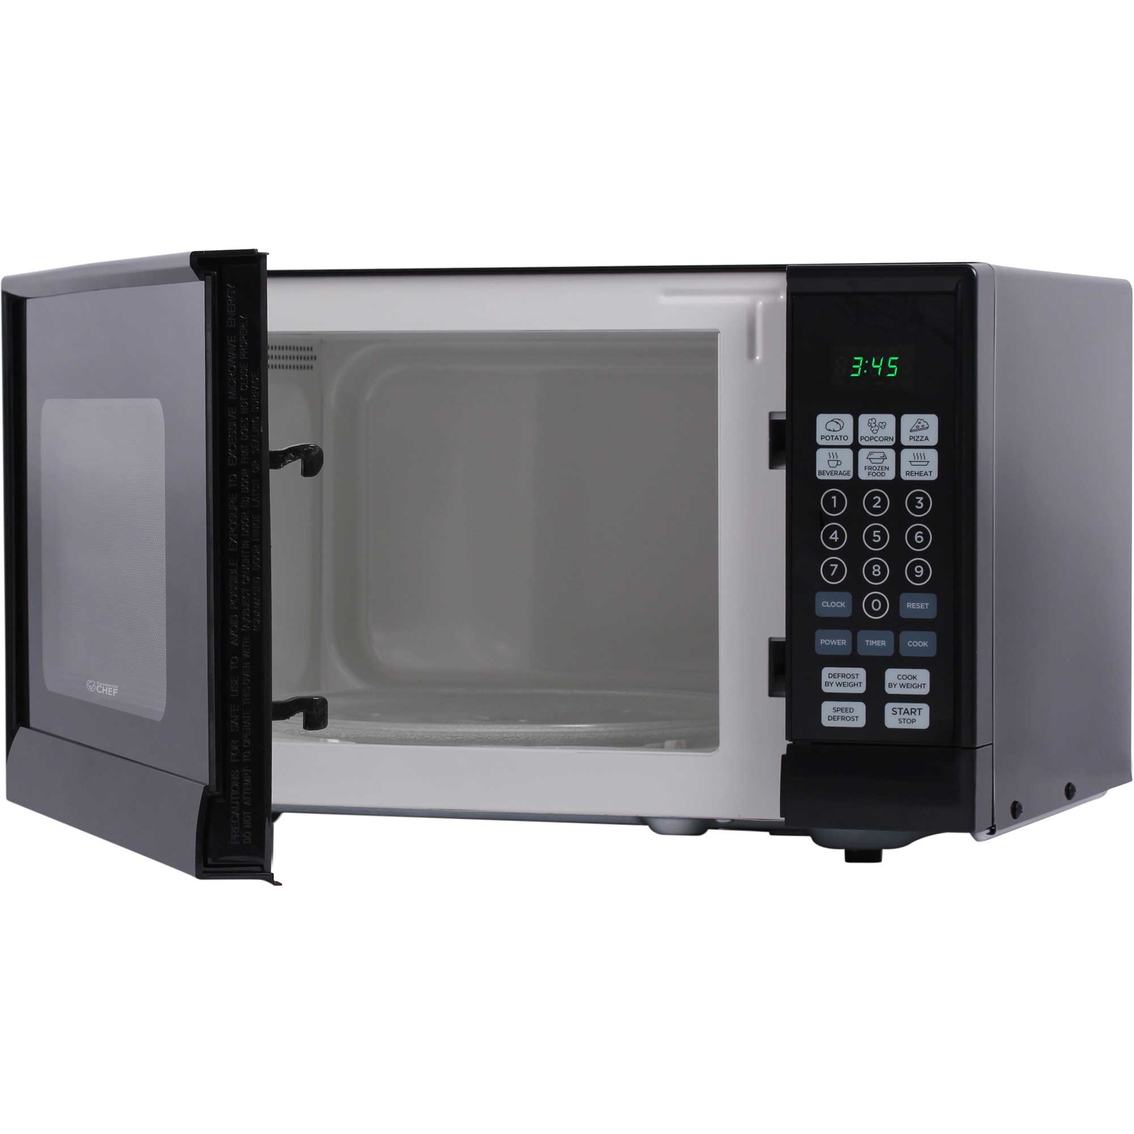 Commercial Chef .9 cu. ft. Counter Top Microwave - Image 3 of 7